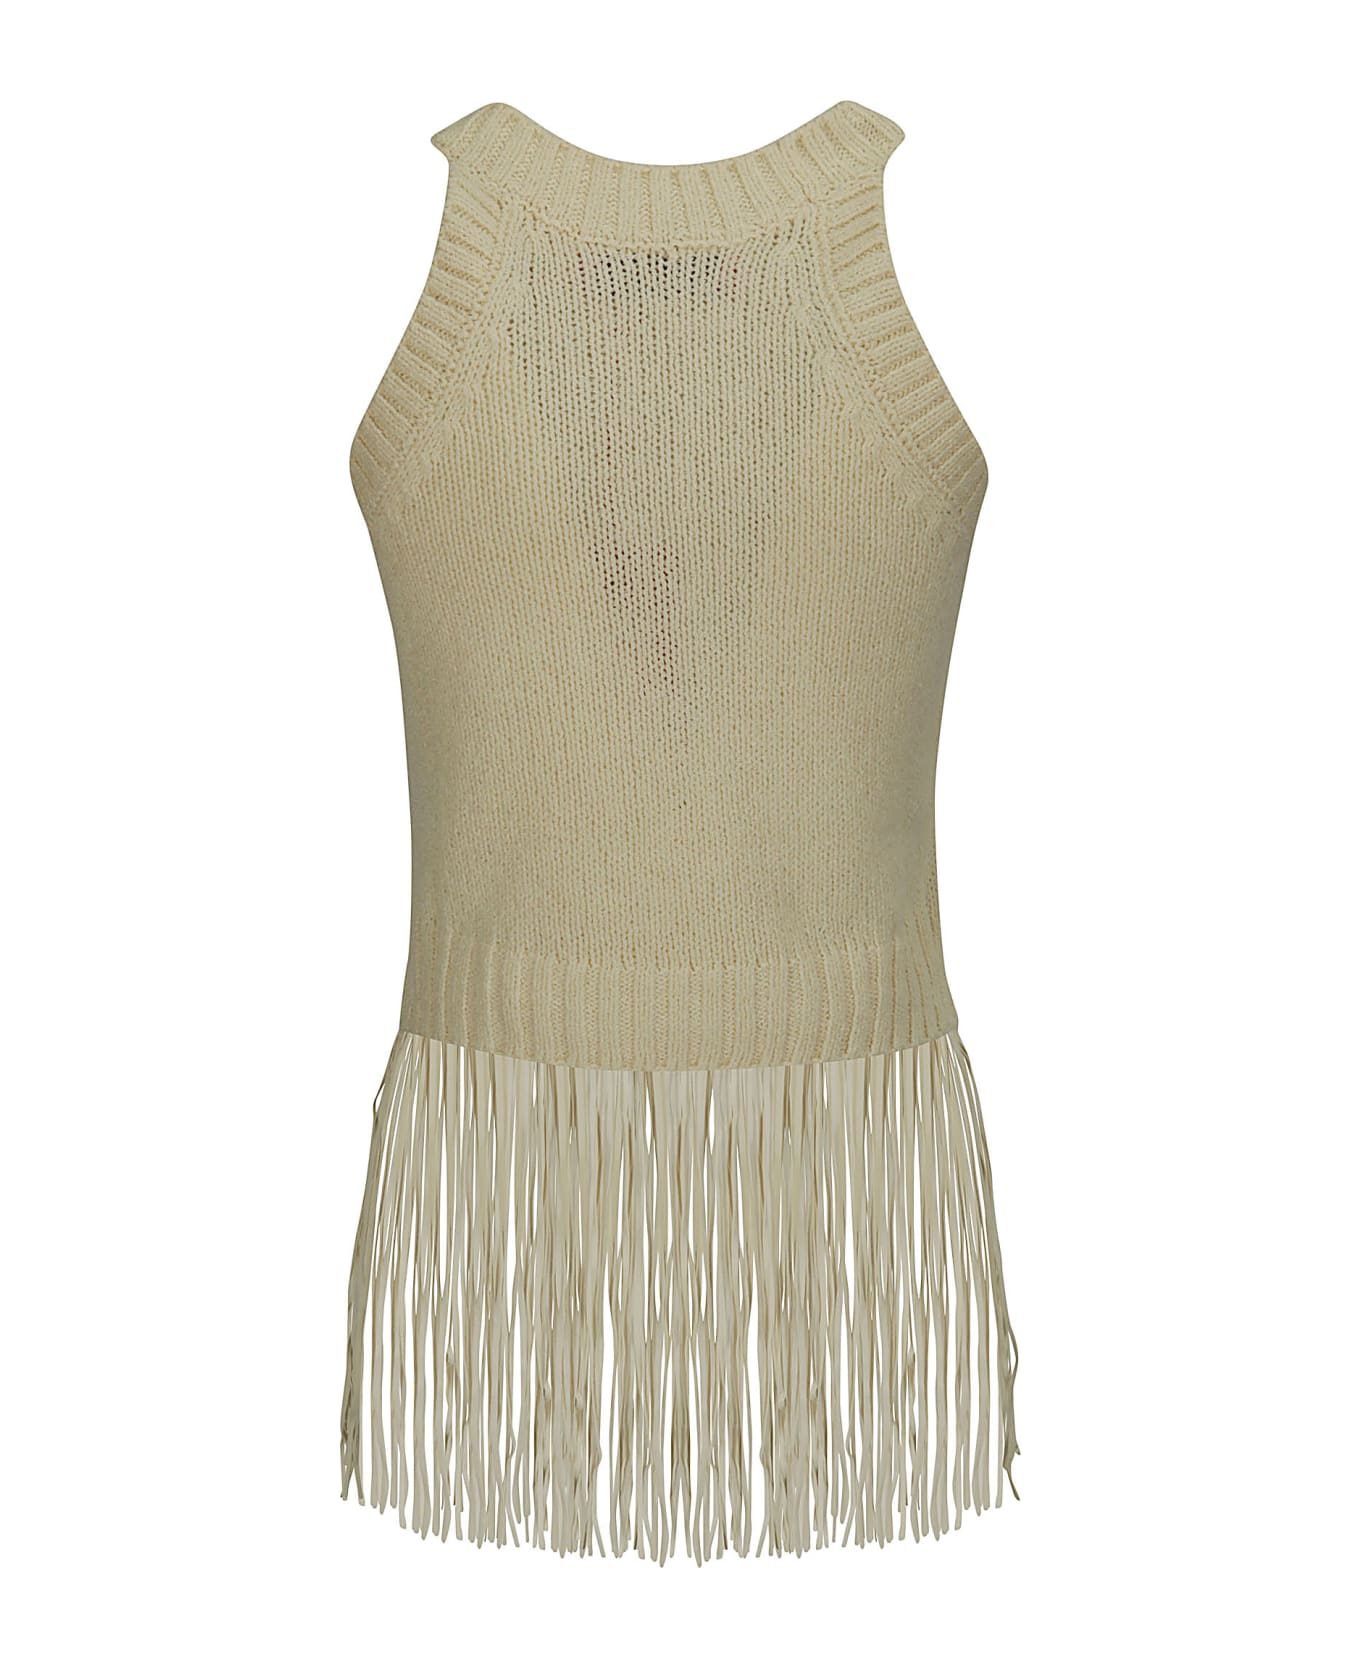 Wild Cashmere Cropped Top Tank With Suede Frings - OFF-WHITE